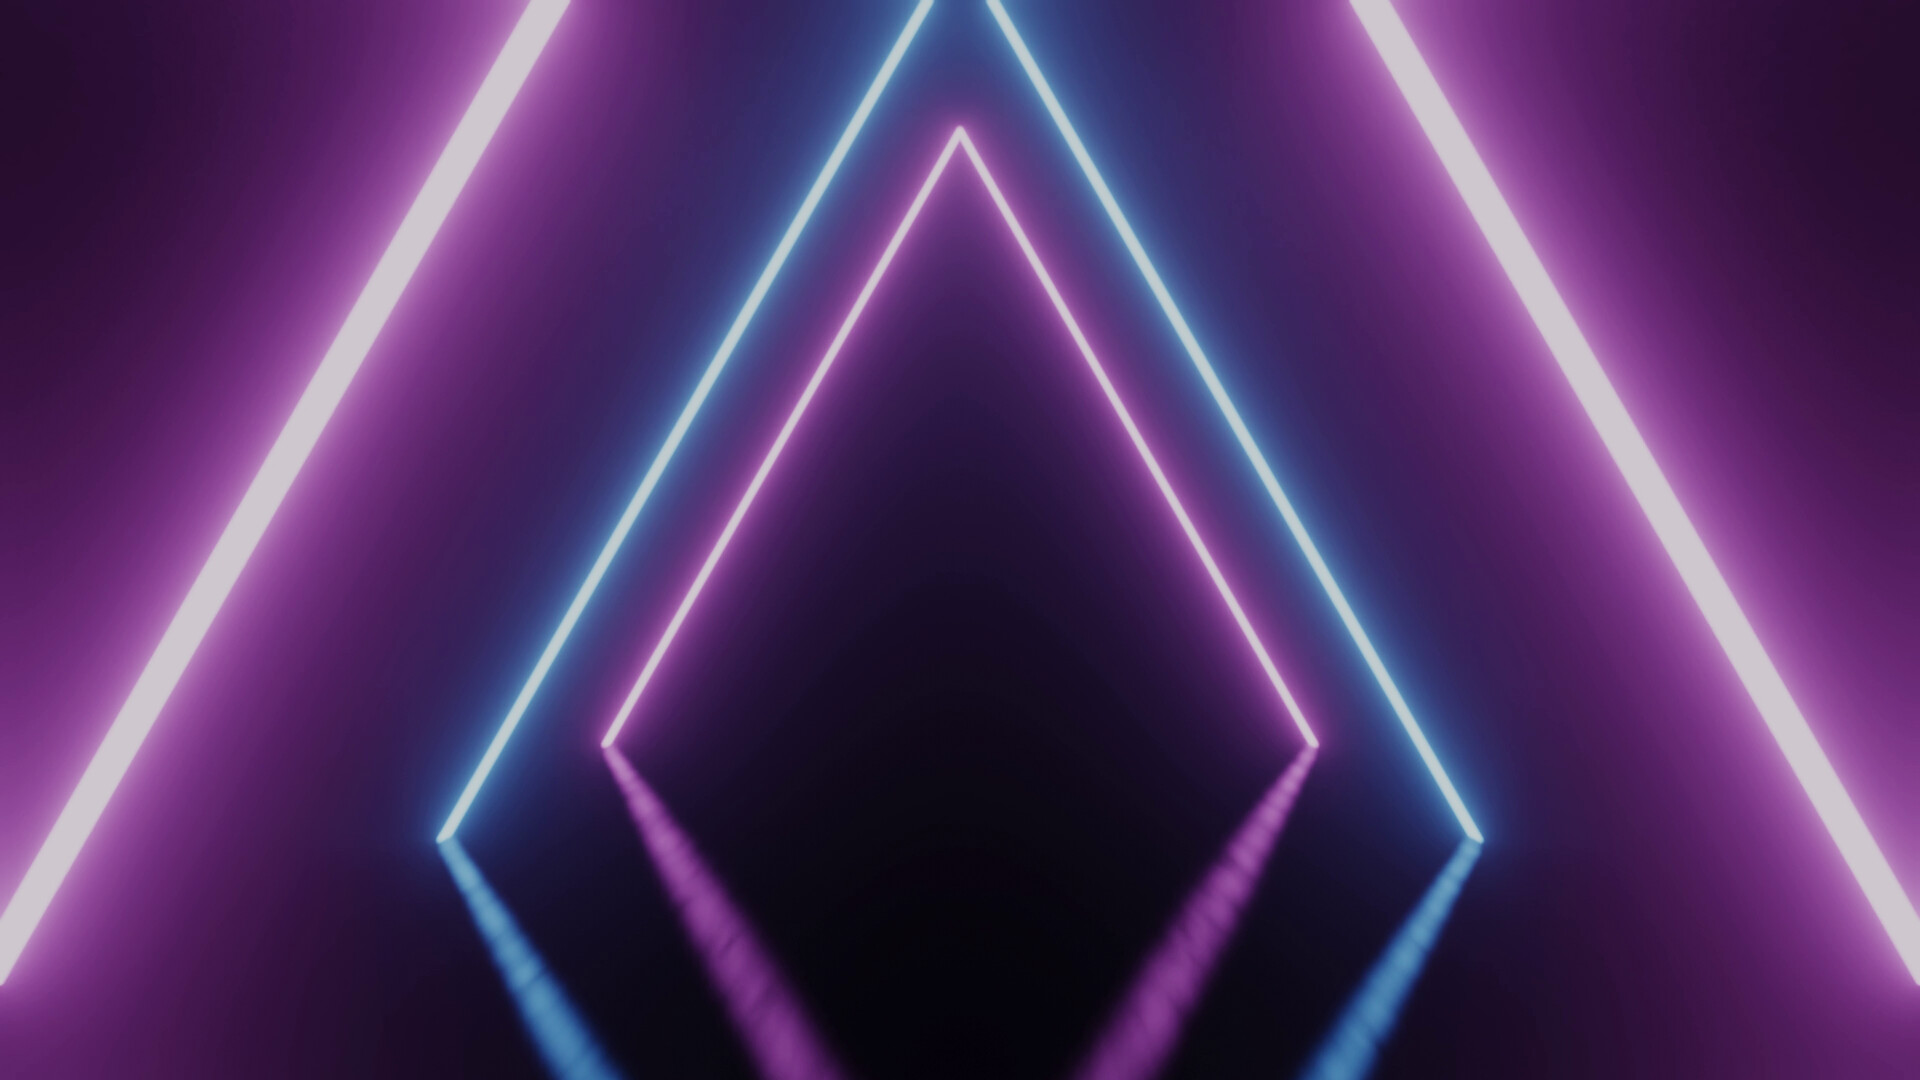 ArtStation - Abstract triangles